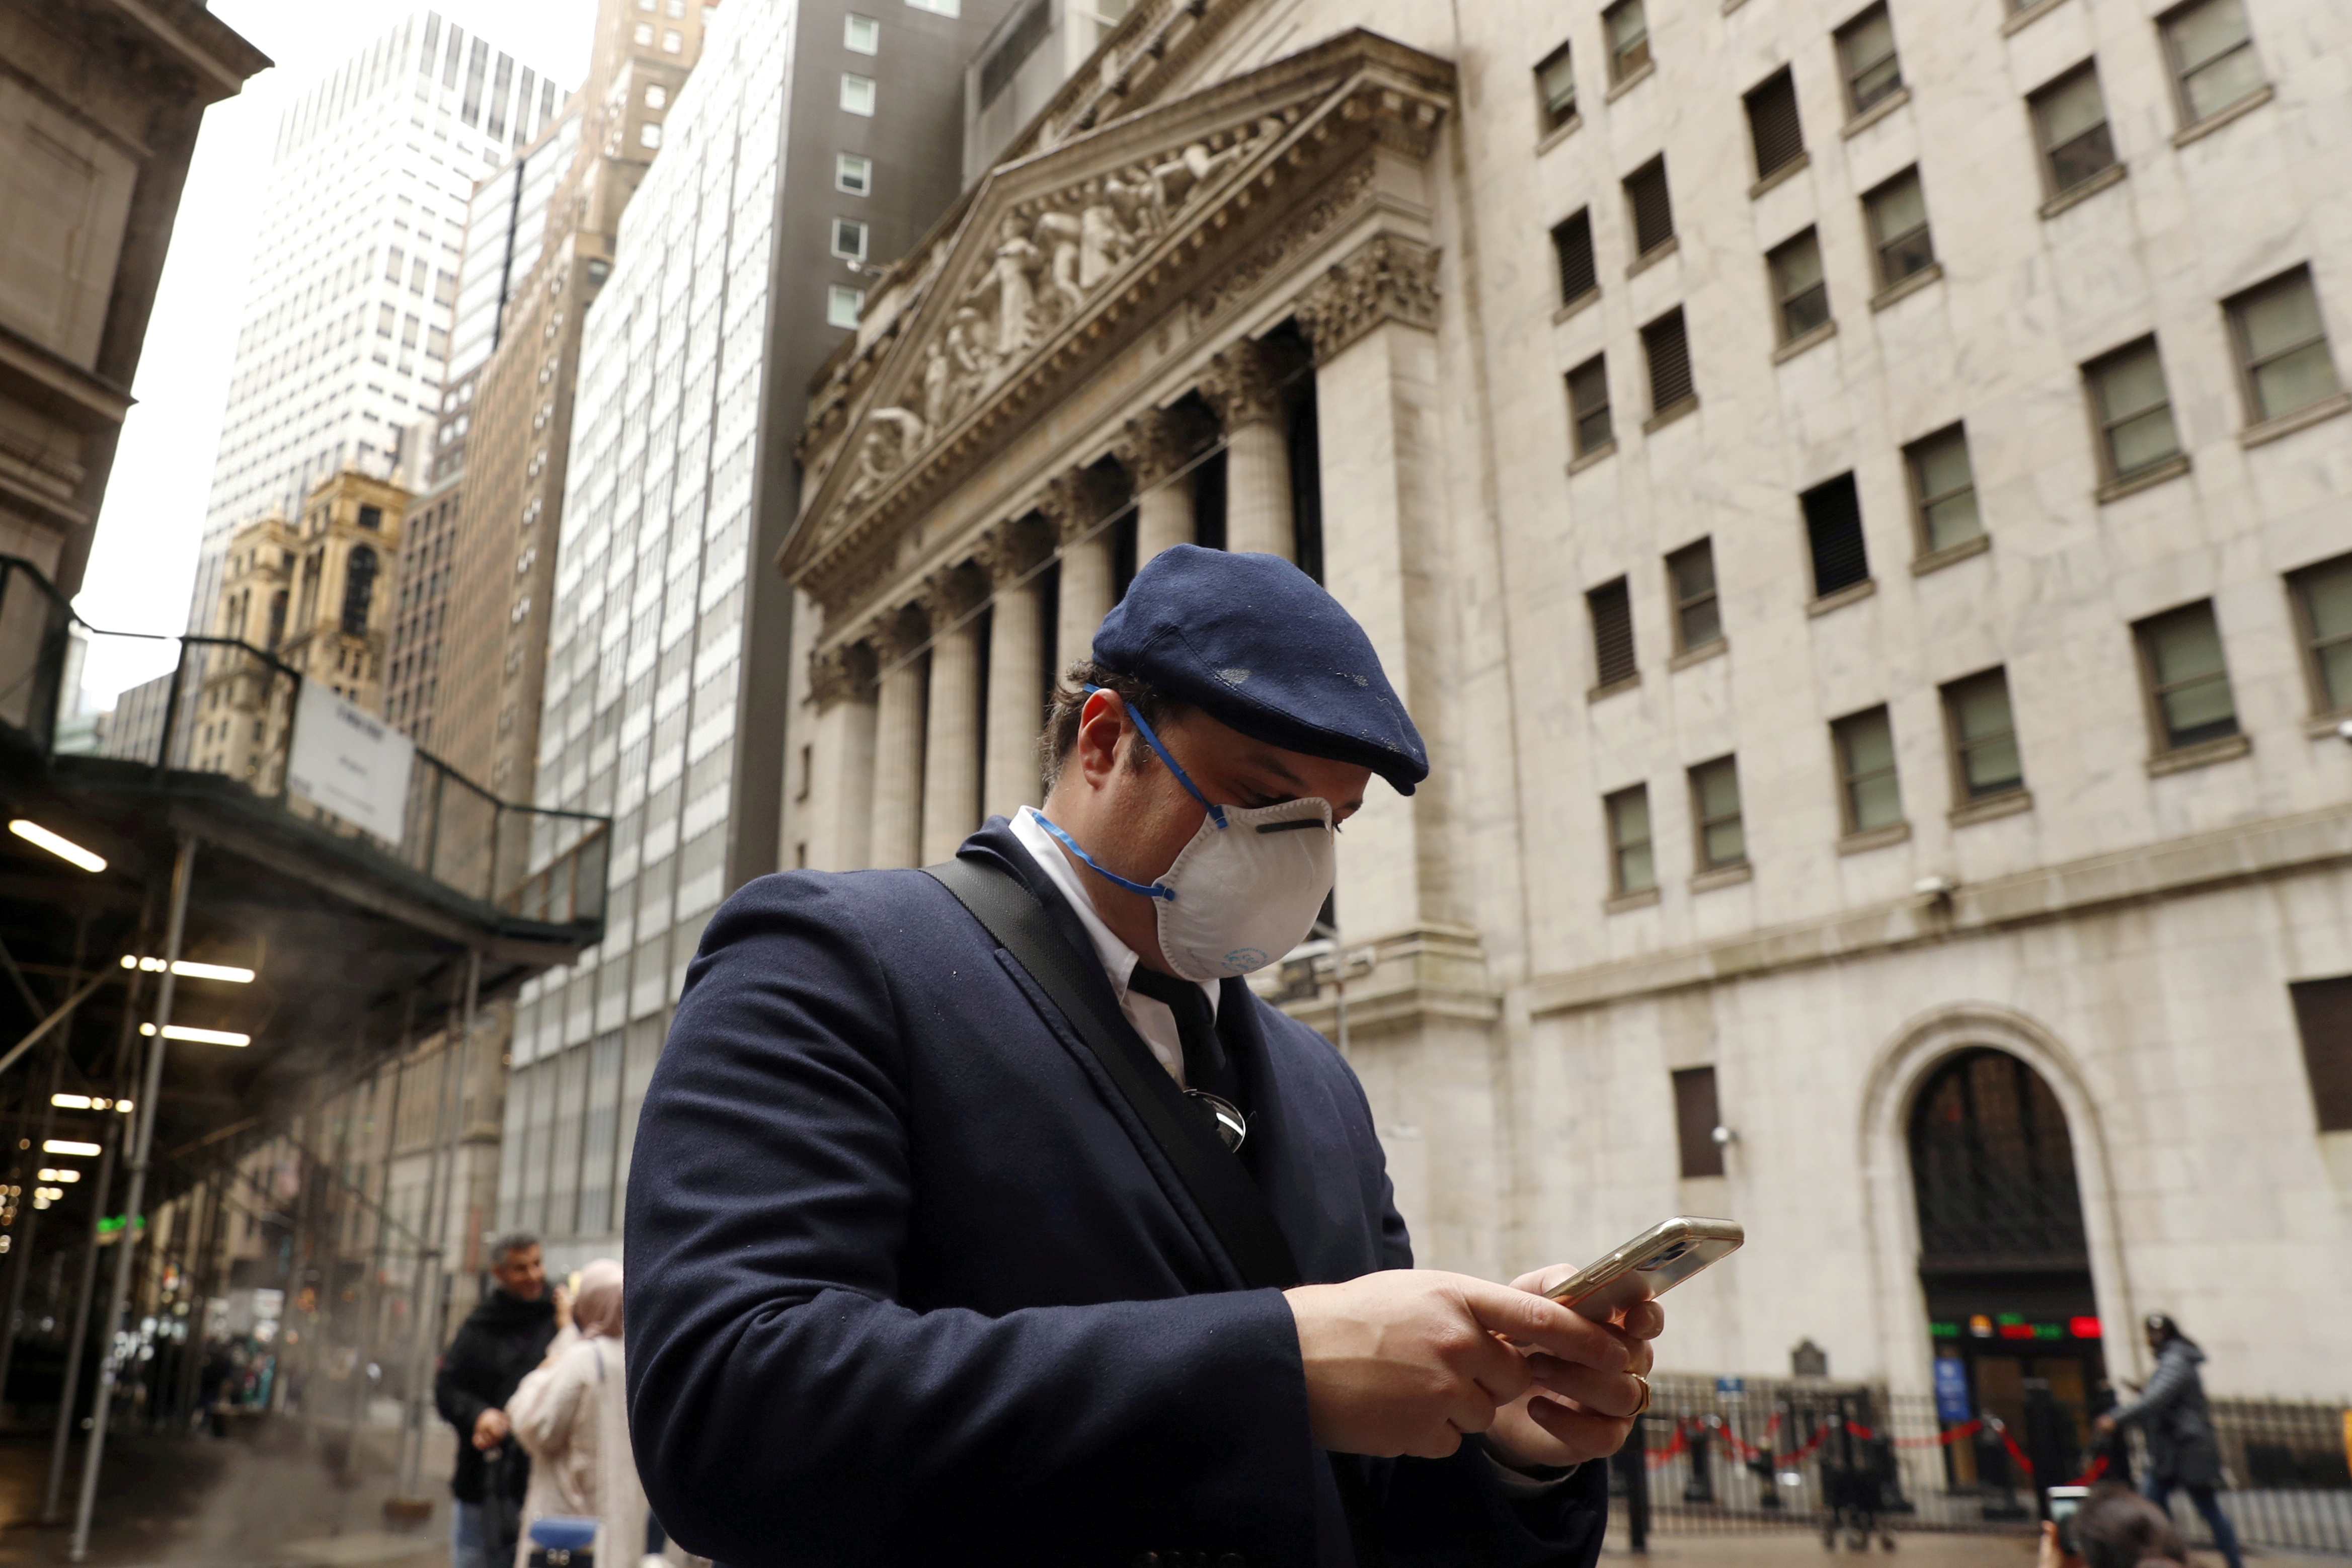 A man walks past the New York Stock Exchange on the corner of Wall and Broad streets in New York City, New York, U.S., March 13, 2020. REUTERS/Lucas Jackson/File Photo